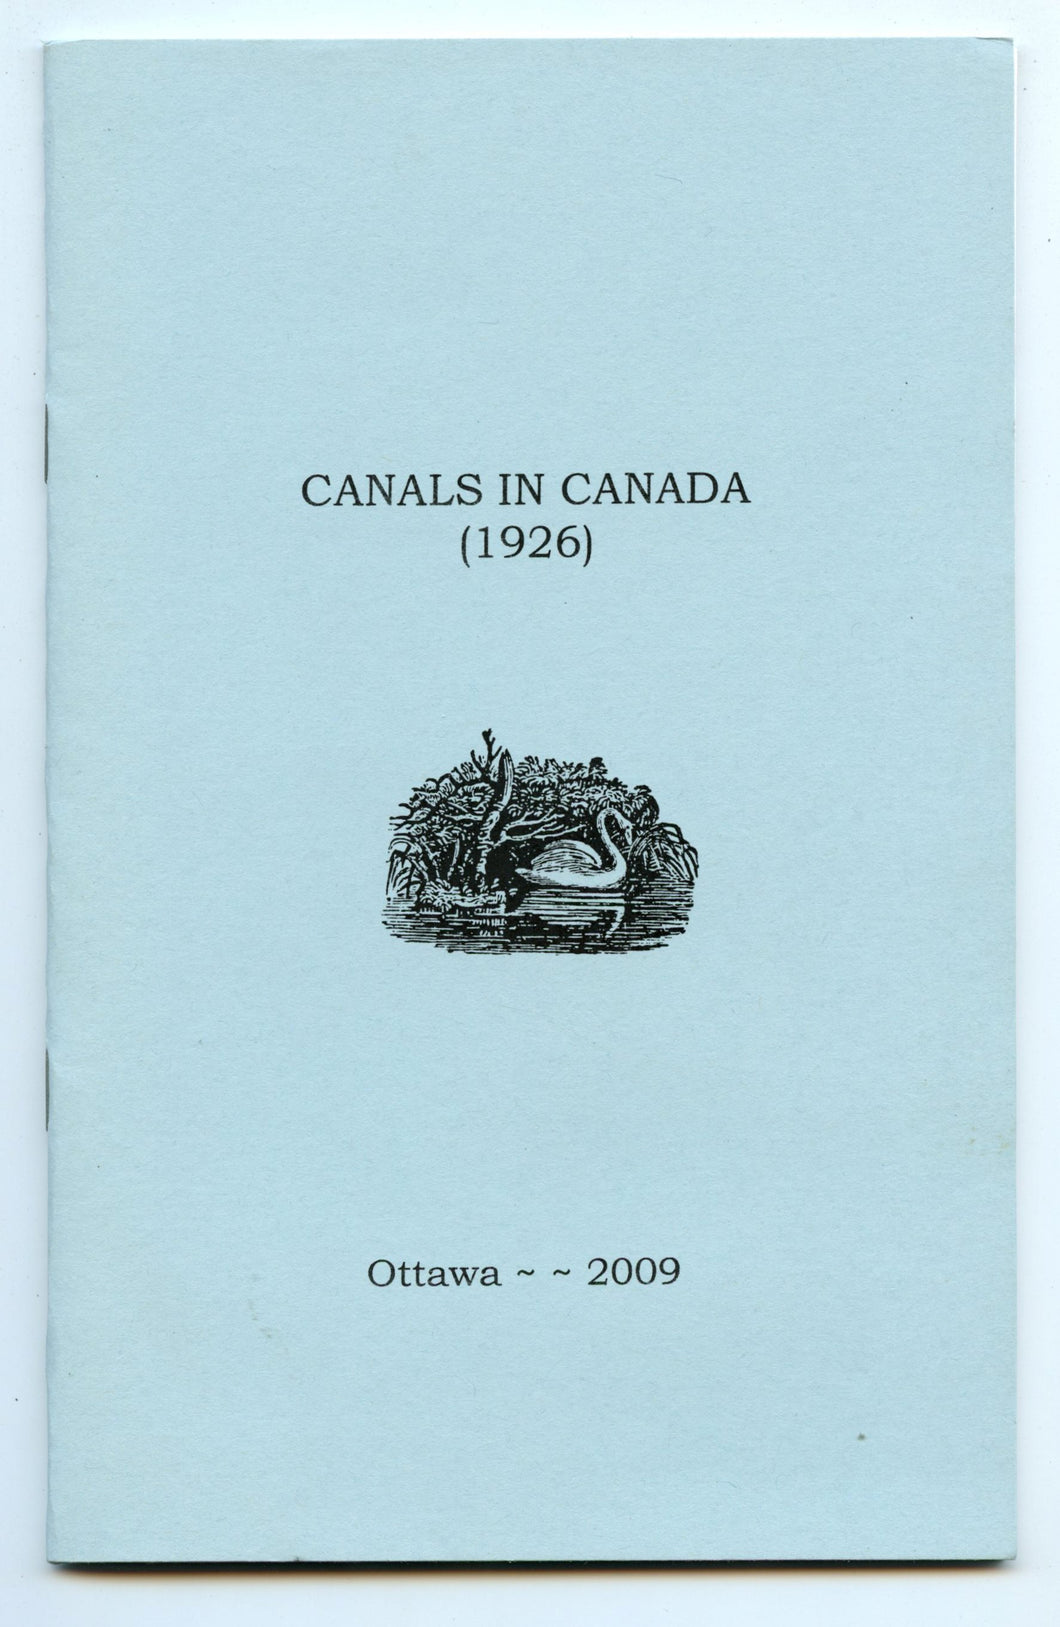 Canals in Canada (1926) comprising extracts from The Oxford Encyclopaedia of Canadian History